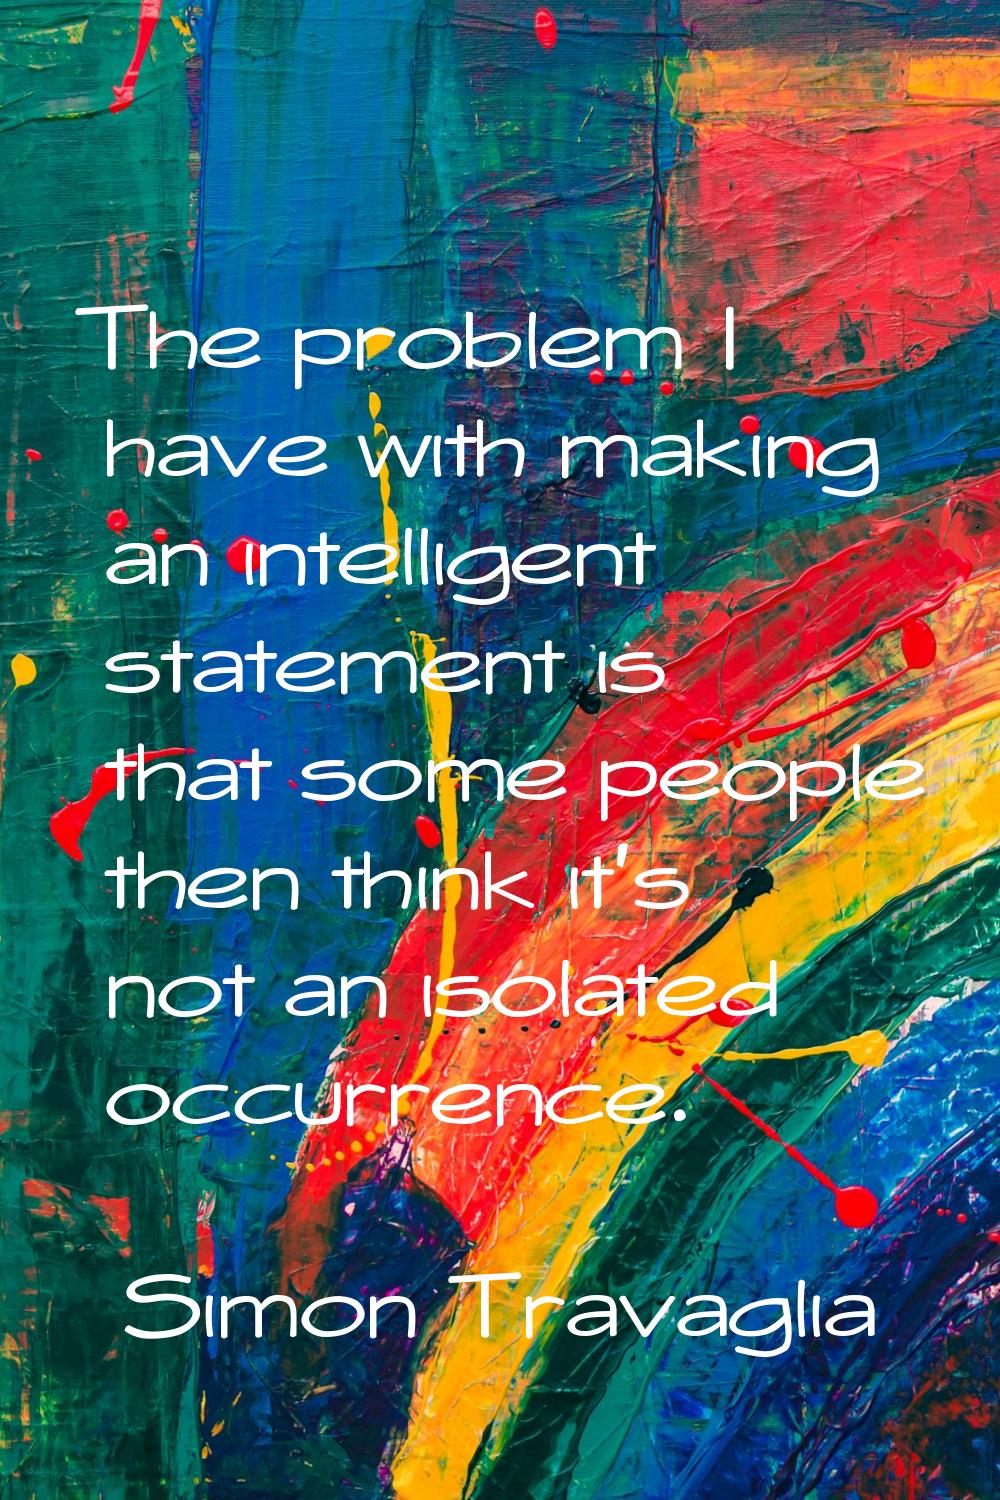 The problem I have with making an intelligent statement is that some people then think it's not an 